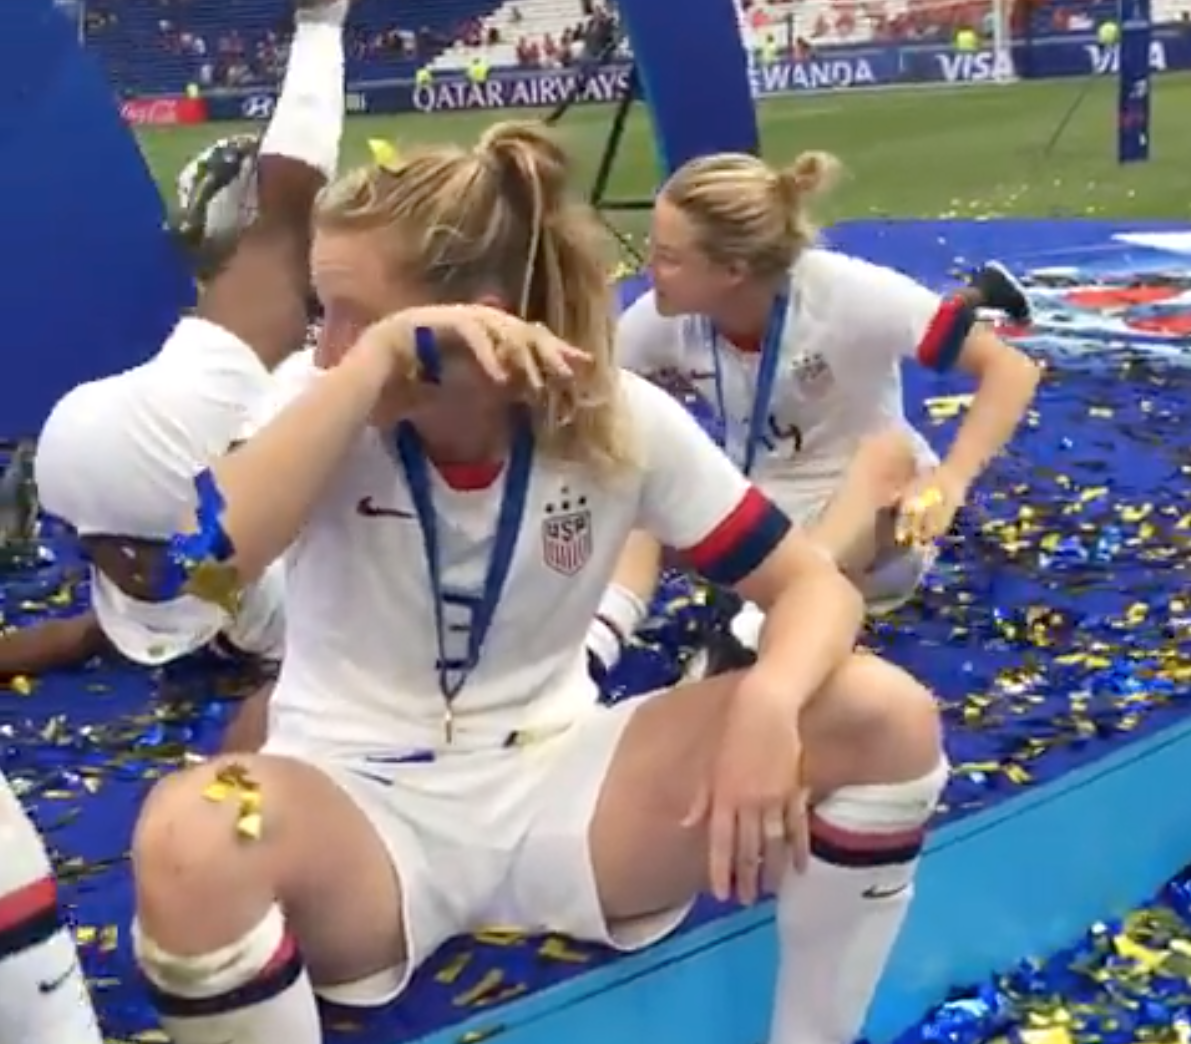 Women's World Cup Completely Arbitrary and Frivolous End-of-Tournament Awards